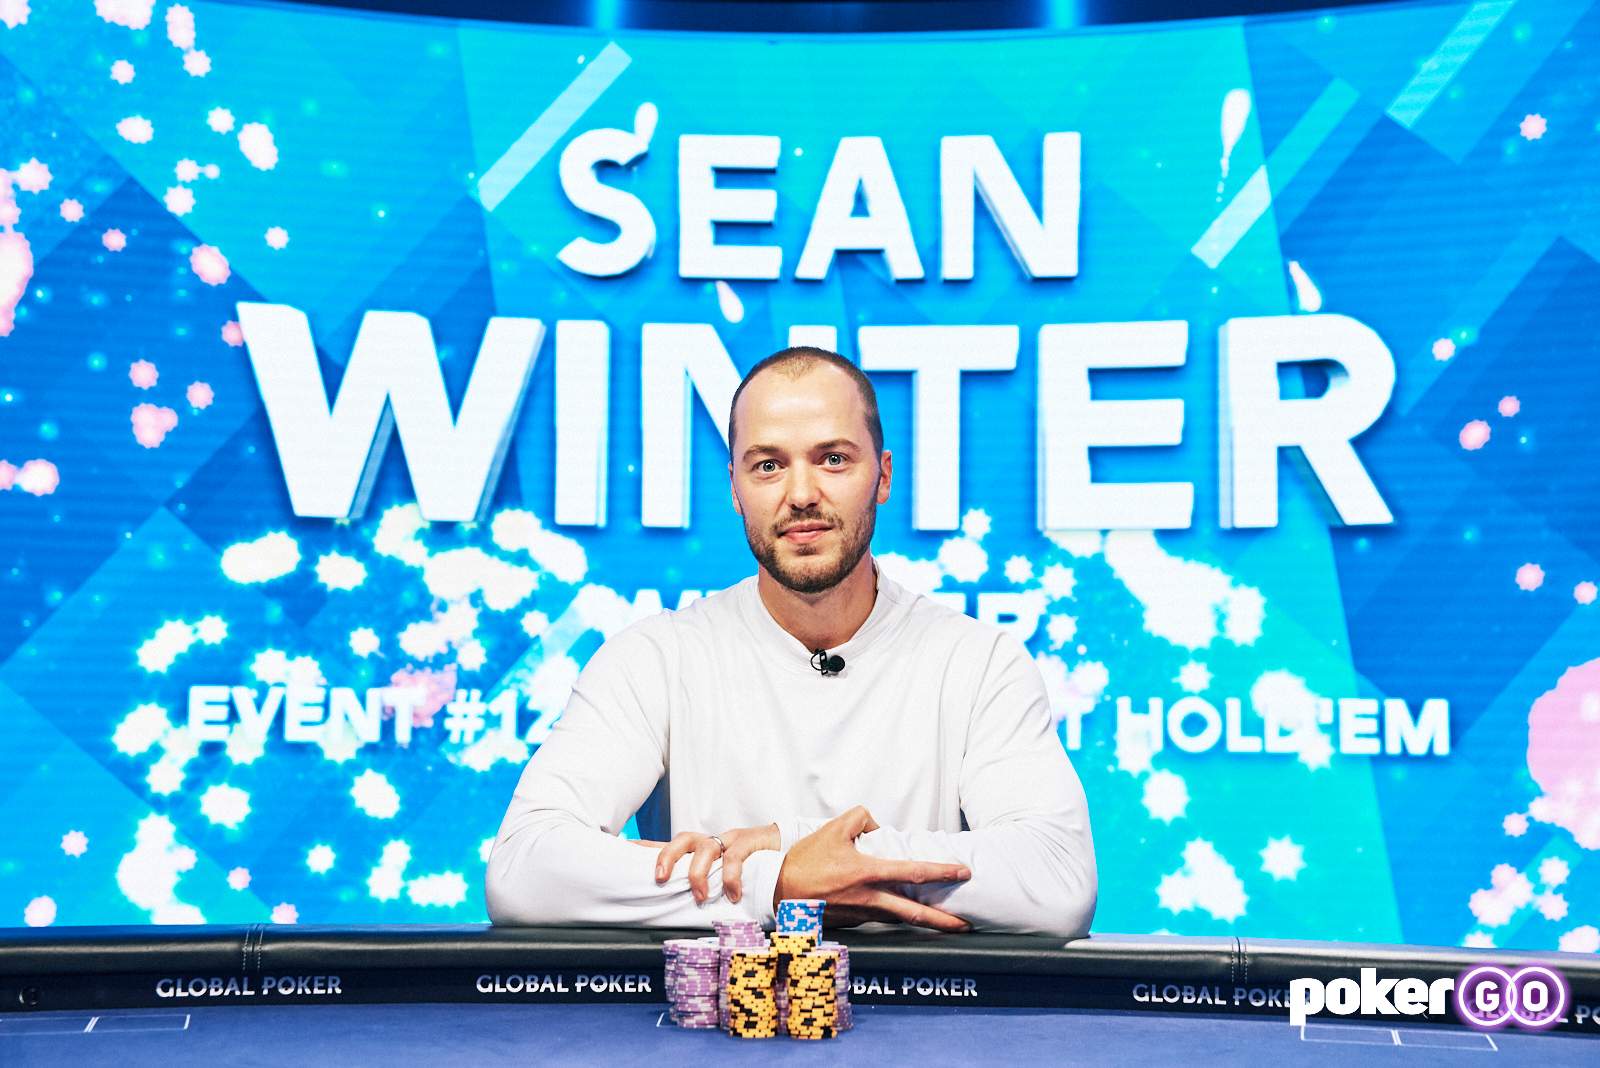 Sean Winter Wins U.S. Poker Open Event #12: $50,000 No Limit Hold'em for $756,000